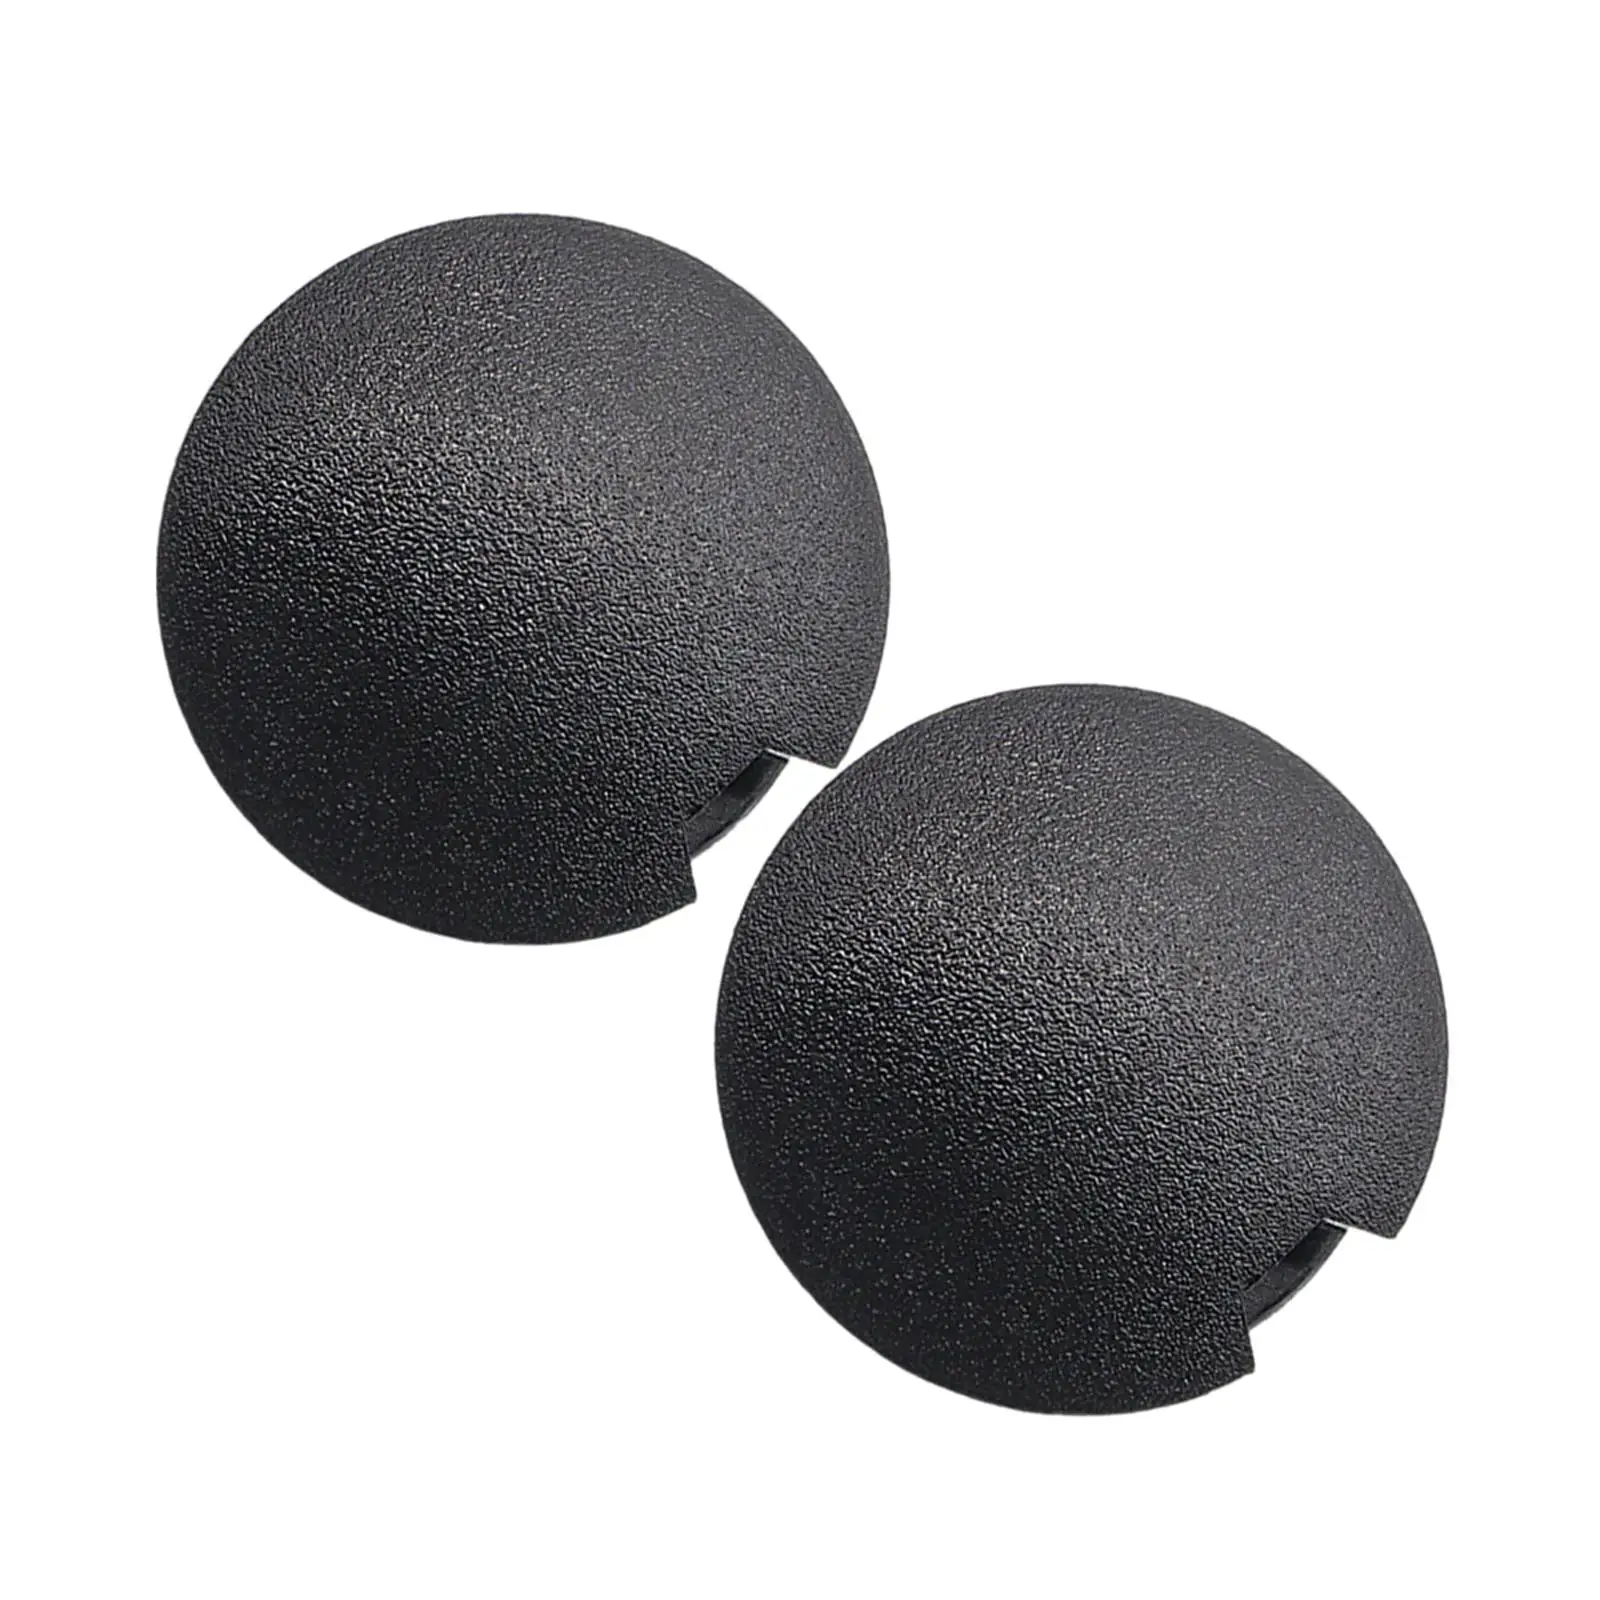 2x Professional Towing Eye Lid cap Replacement for Smart 451 Trailer